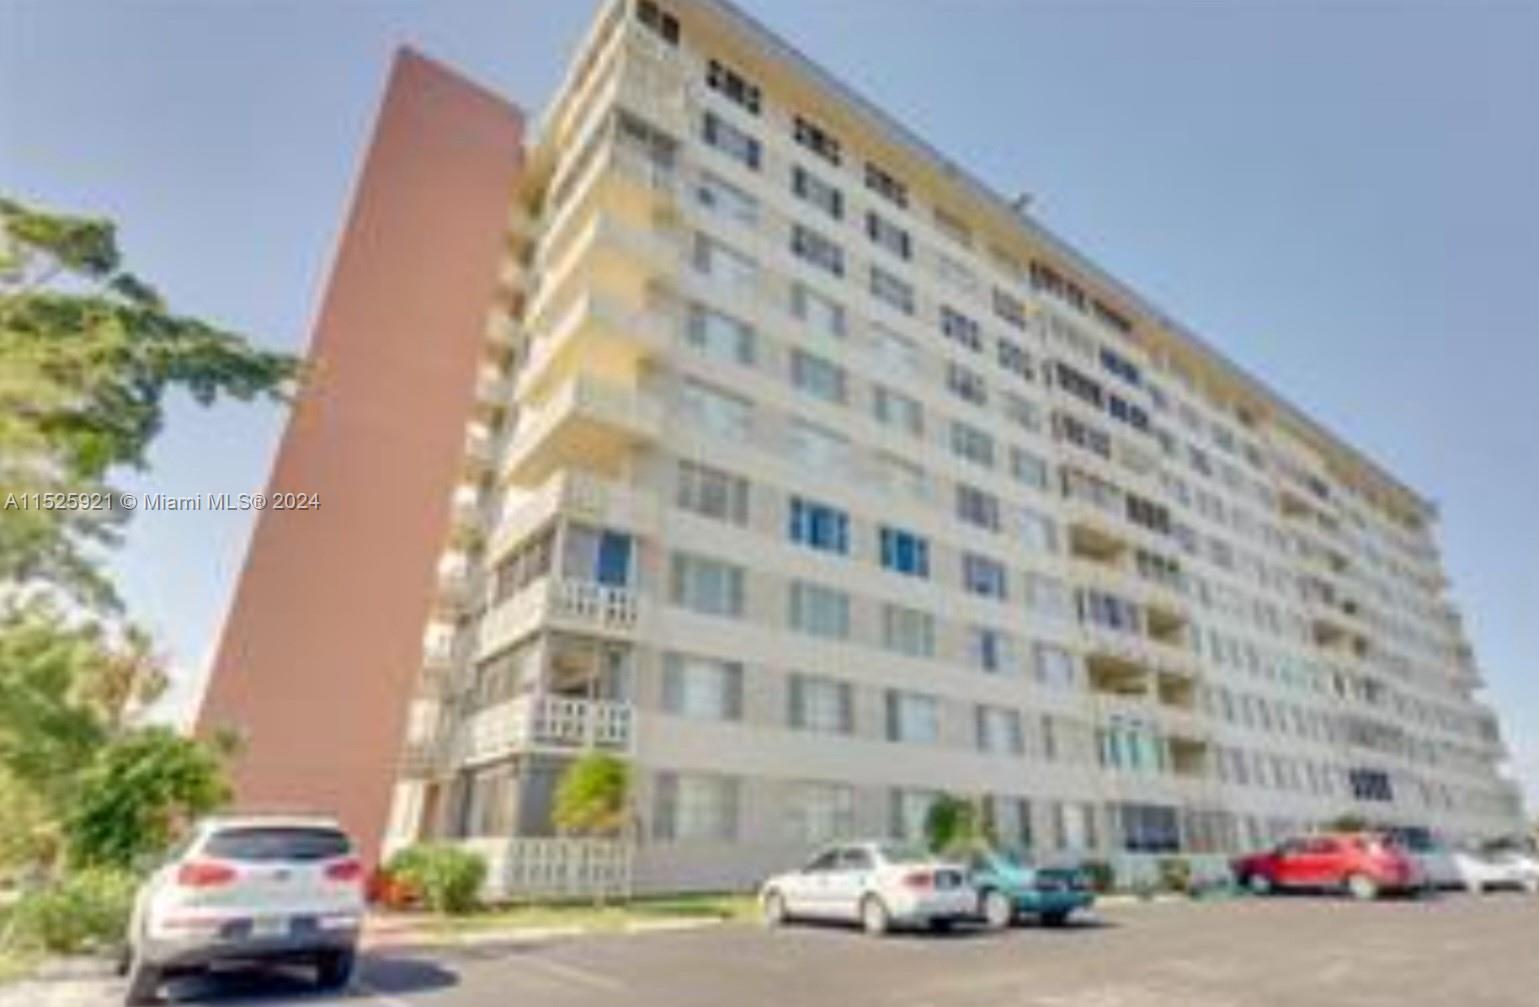 Photo of 4350 Hillcrest Dr #715 in Hollywood, FL